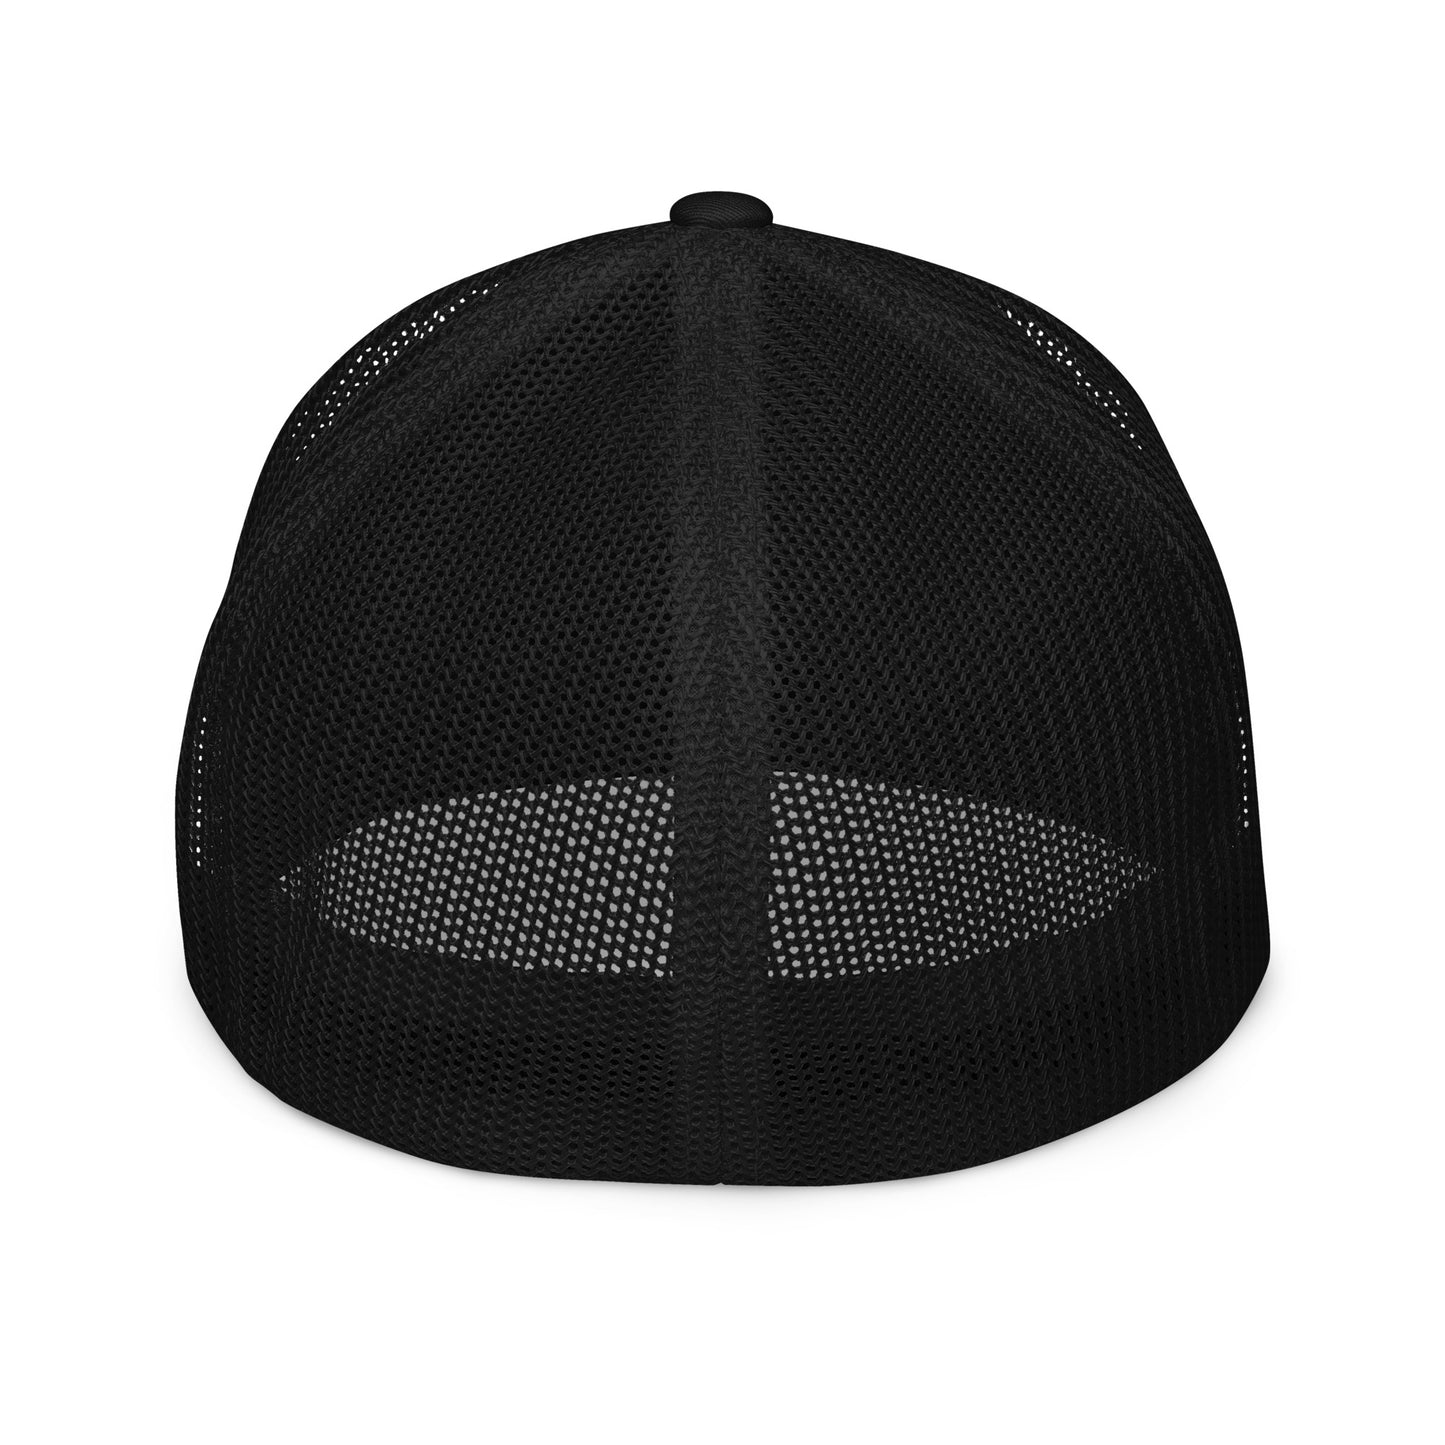 Grip Support Truckers Hat with Flex Fit + Mesh Back